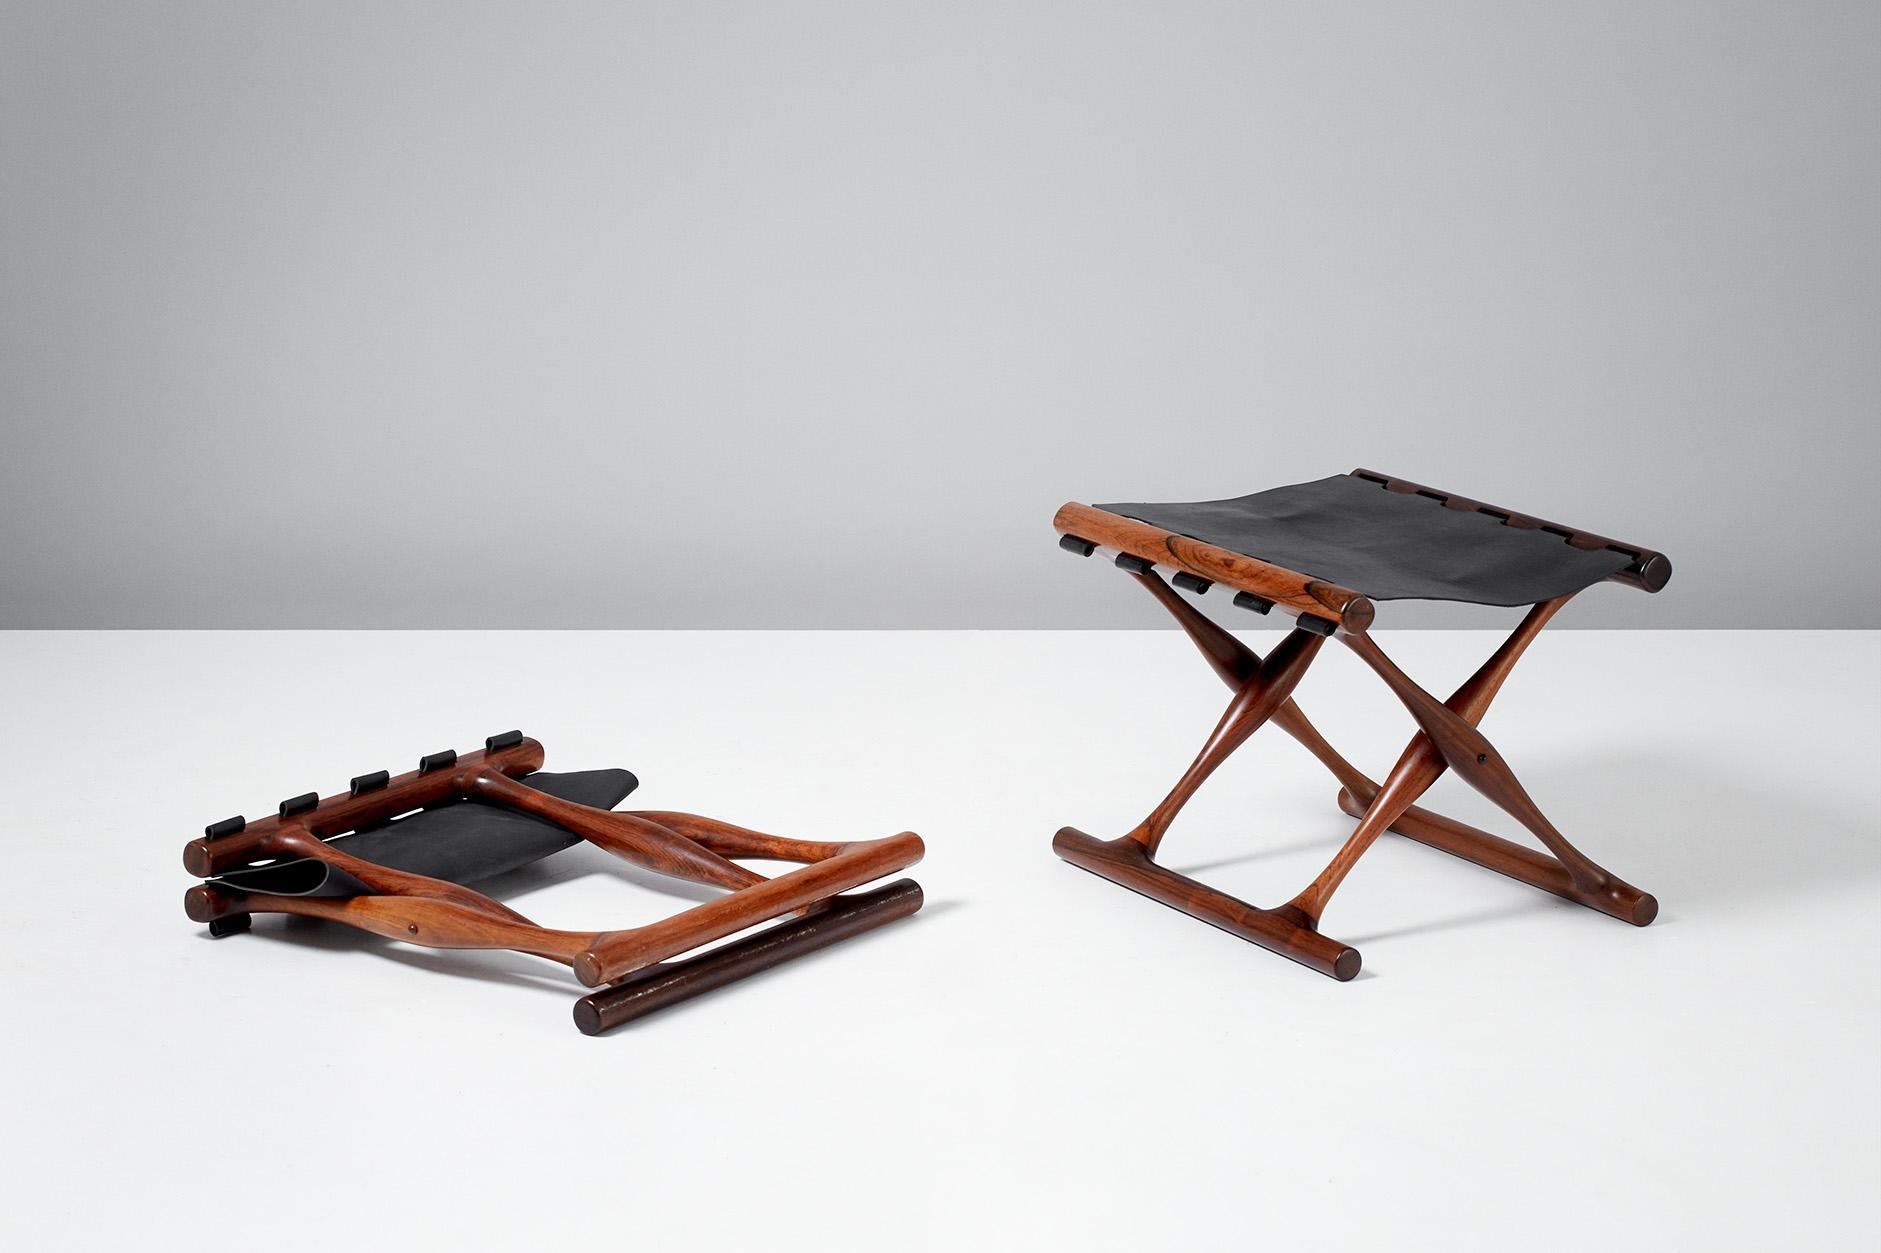 Poul Hundevad

Guldhoj Folding Stools, 1948

Rarely seen pair of Model 41 folding stools in Brazilian rosewood with black saddle leather seats. The Guldhoj stool was designed as a replica of a Bronze Age artefact found in Vamdrup, Denmark that